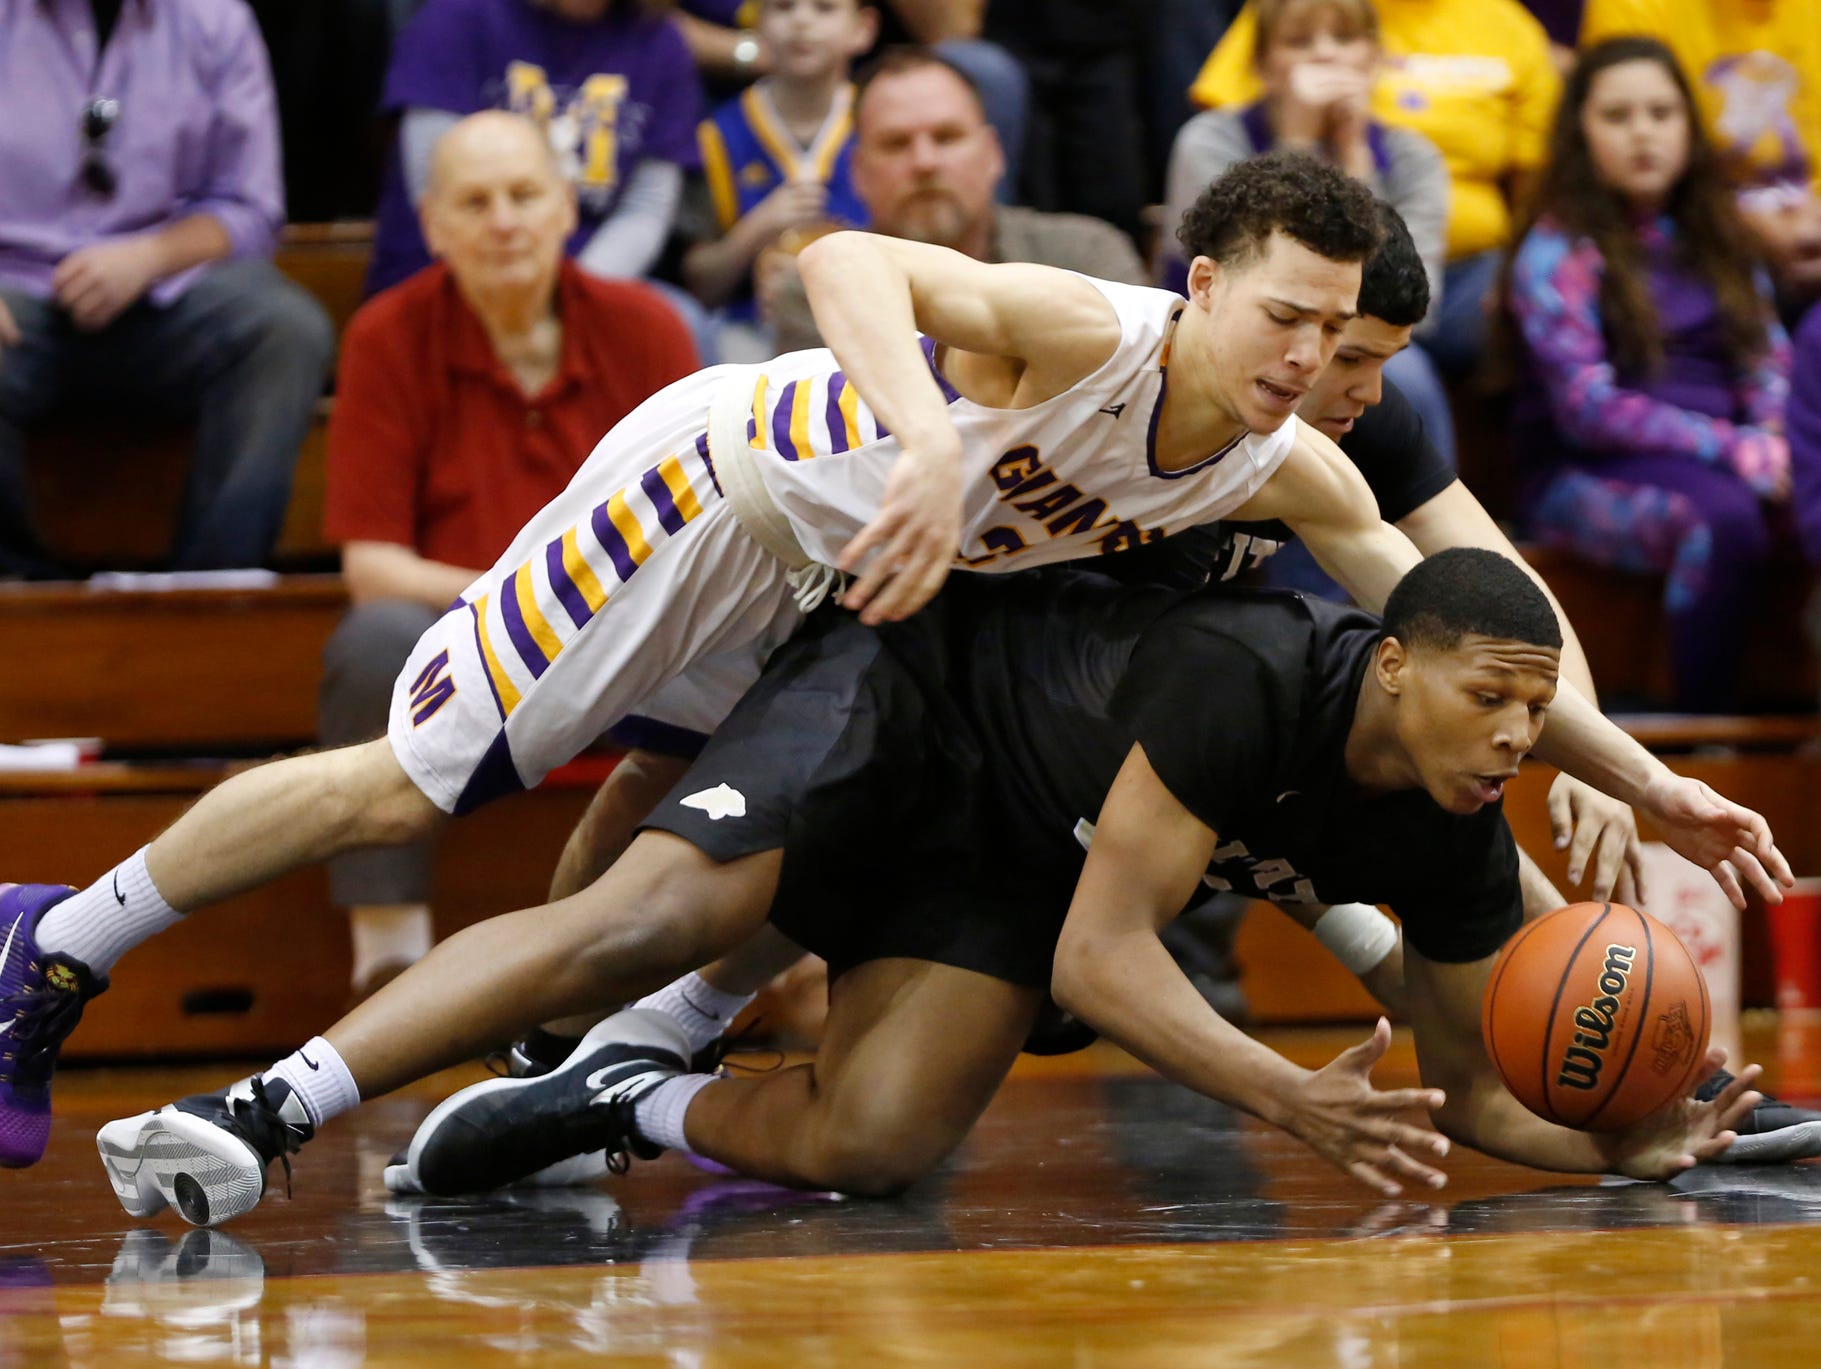 Marion's Tim Leavell, top, and Griffith's Cornell Hampton dive for a loose ball in the Class 3A basketball semistate Wednesday, March 23, 2016, Lafayette Jefferson High School. Marion defeated Griffith 60-58.